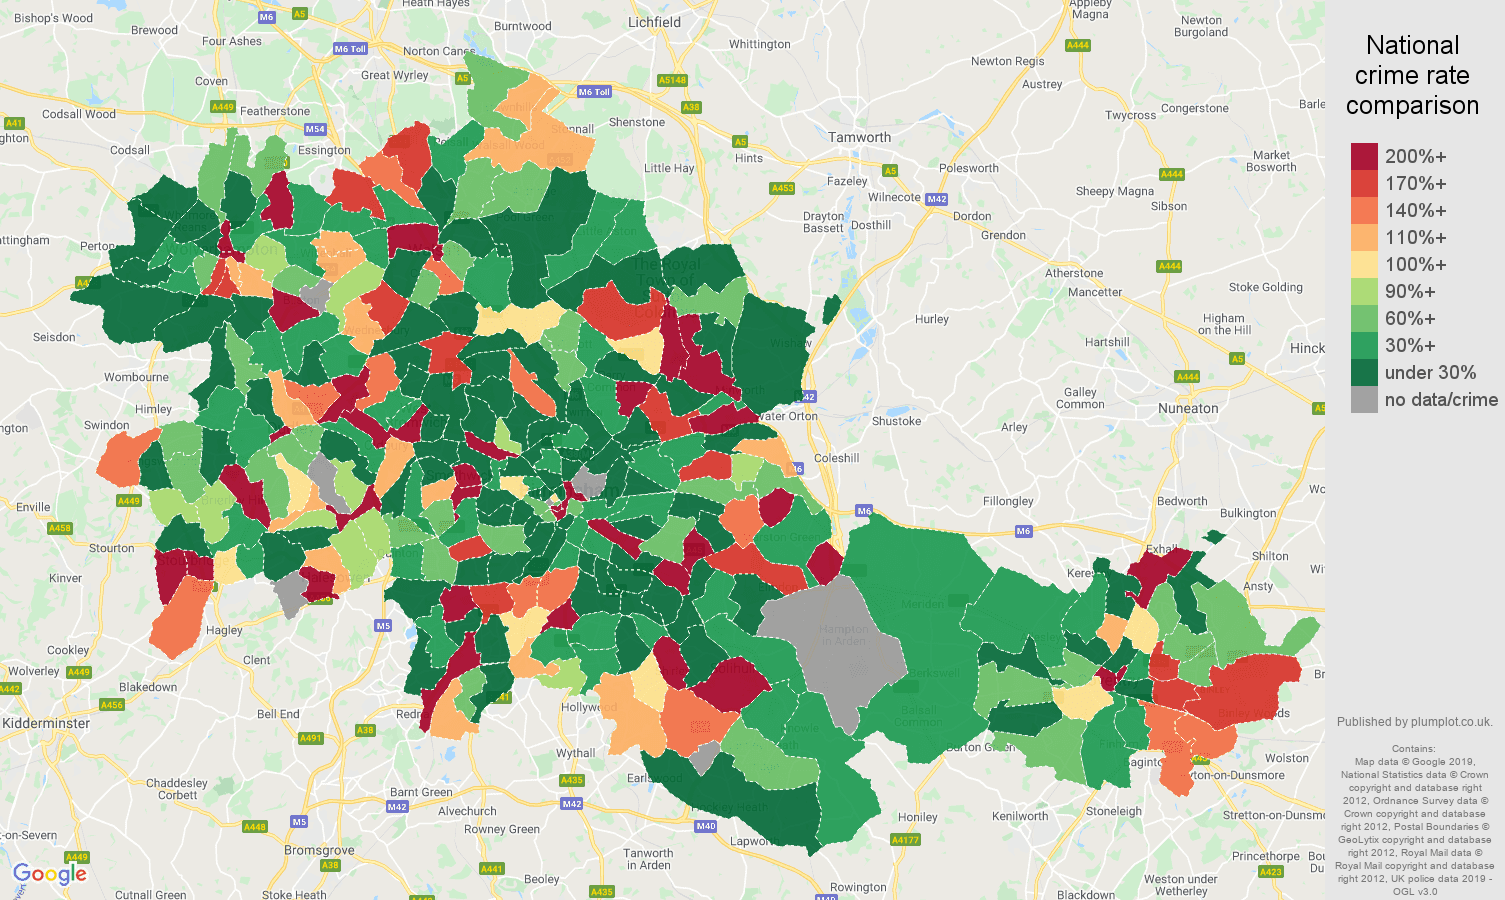 West Midlands county shoplifting crime rate comparison map